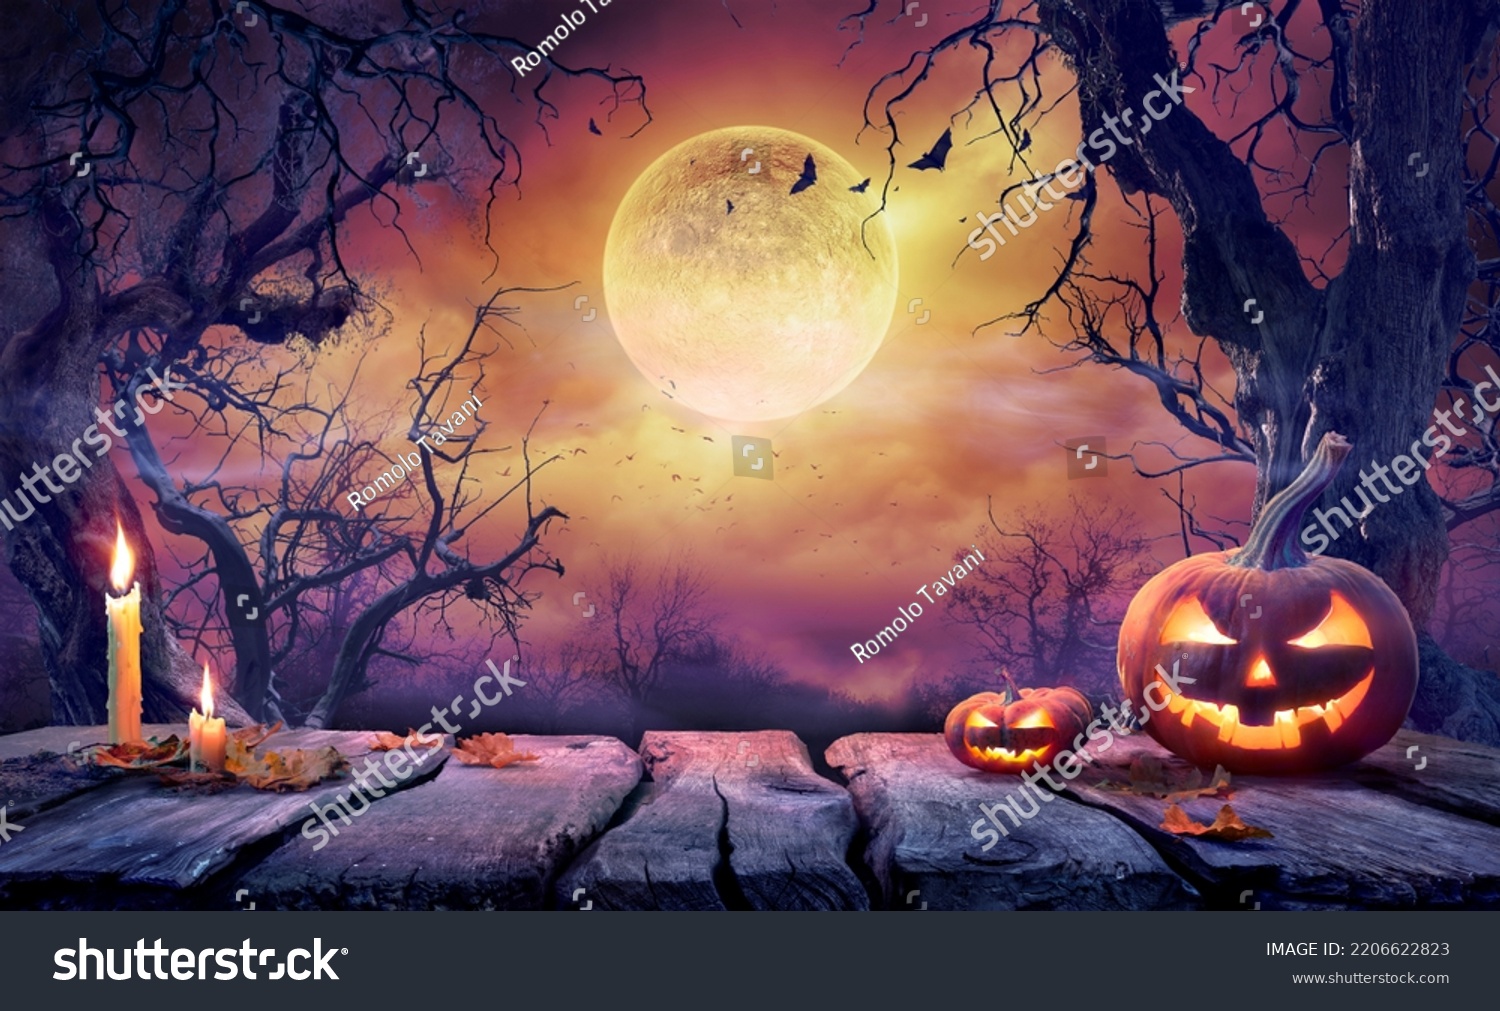 Halloween Table - Old Wooden Plank With Orange Pumpkin In Purple Landscape With Moonlight #2206622823